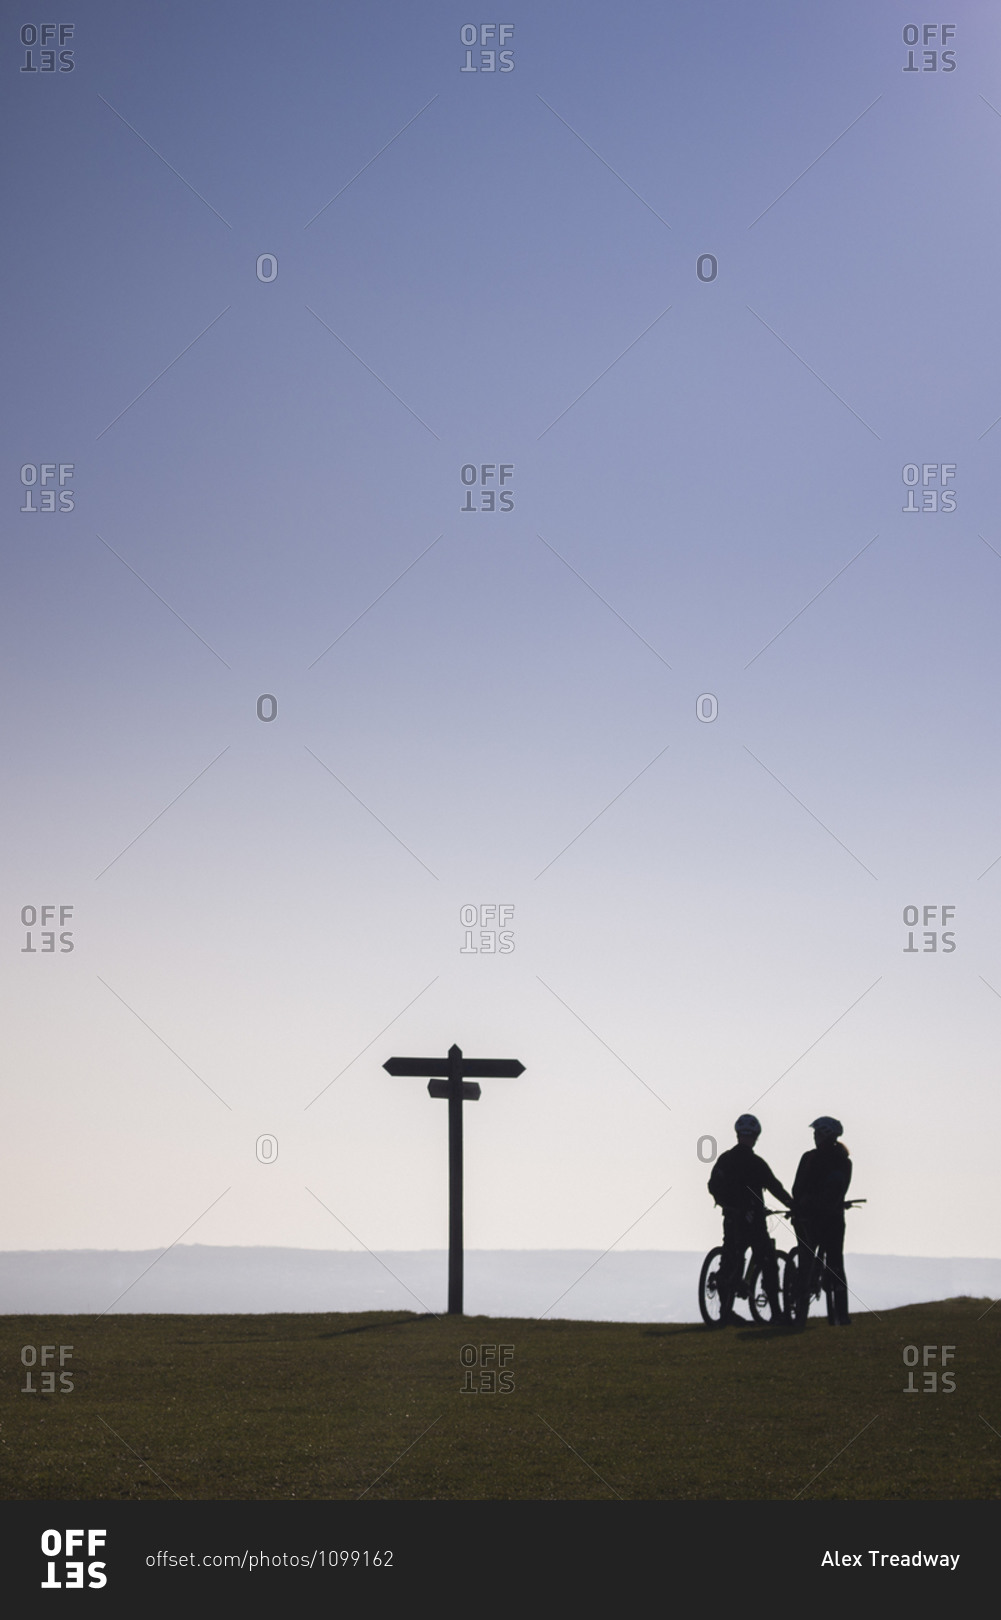 Cyclists in Dorset in the UK take a break on the brow of a hill at sunset